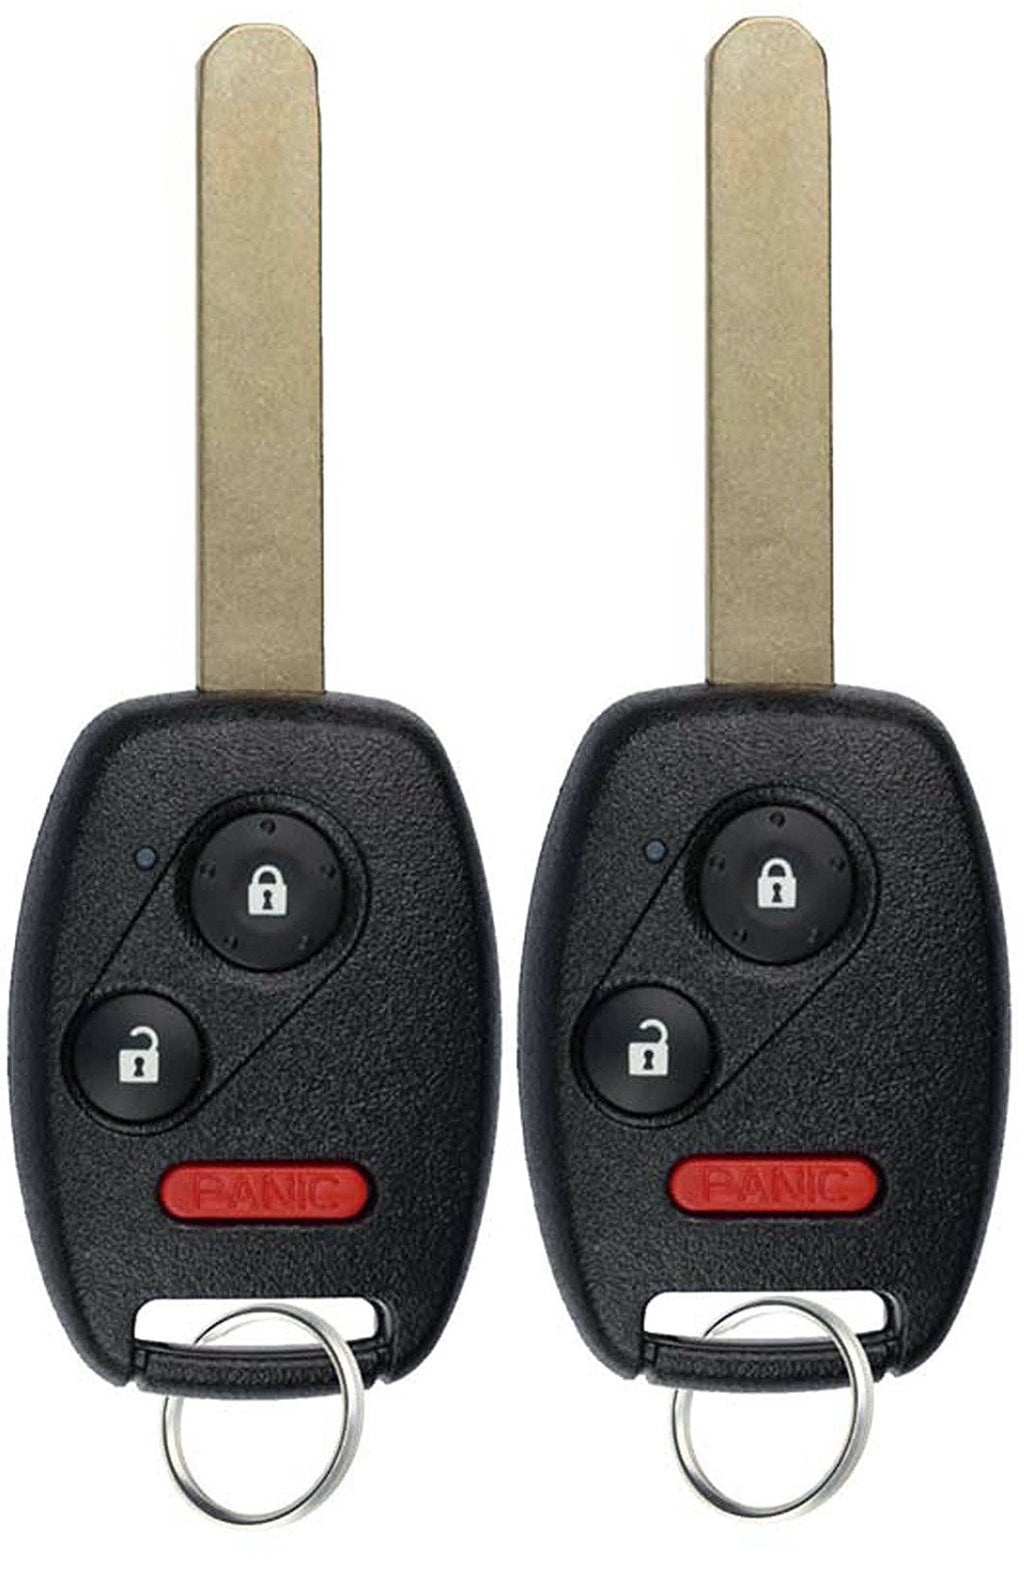  [AUSTRALIA] - KeylessOption Keyless Entry Remote Control Uncut Car Ignition Key Fob Replacement for N5F-S0084A (Pack of 2) black